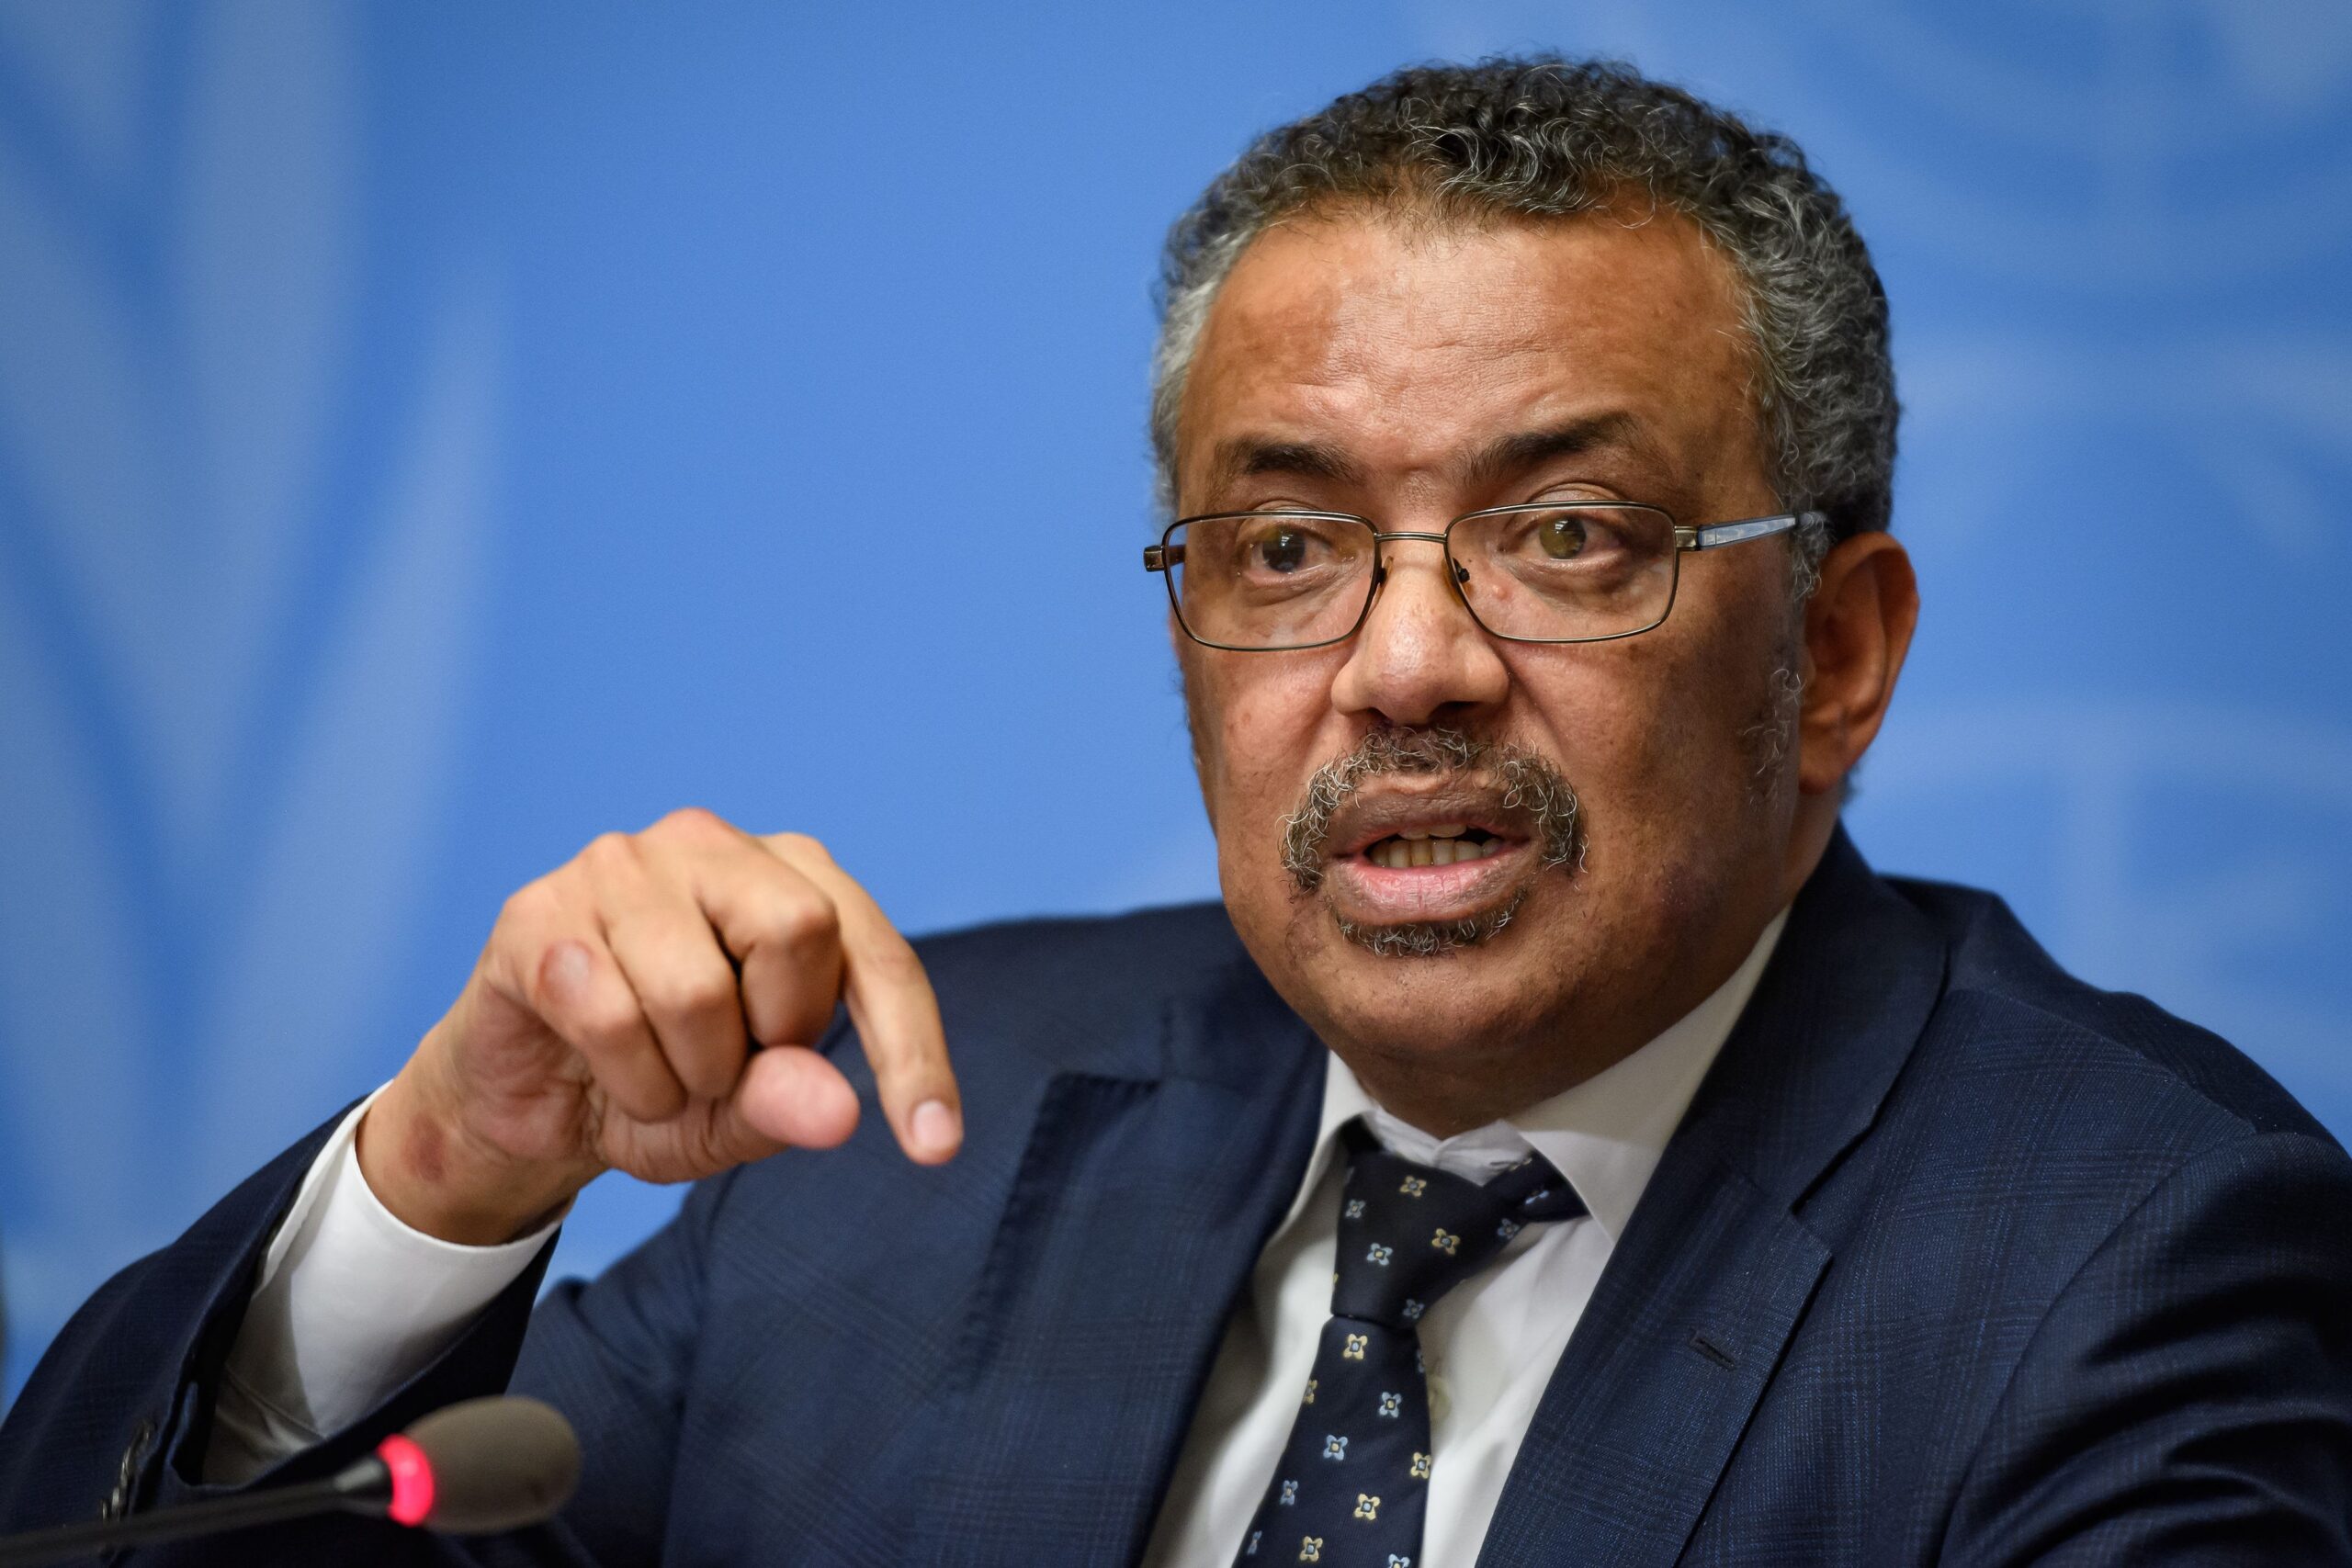 Dr. Tedros, “Tigray People Are not Threat to Ethiopia”